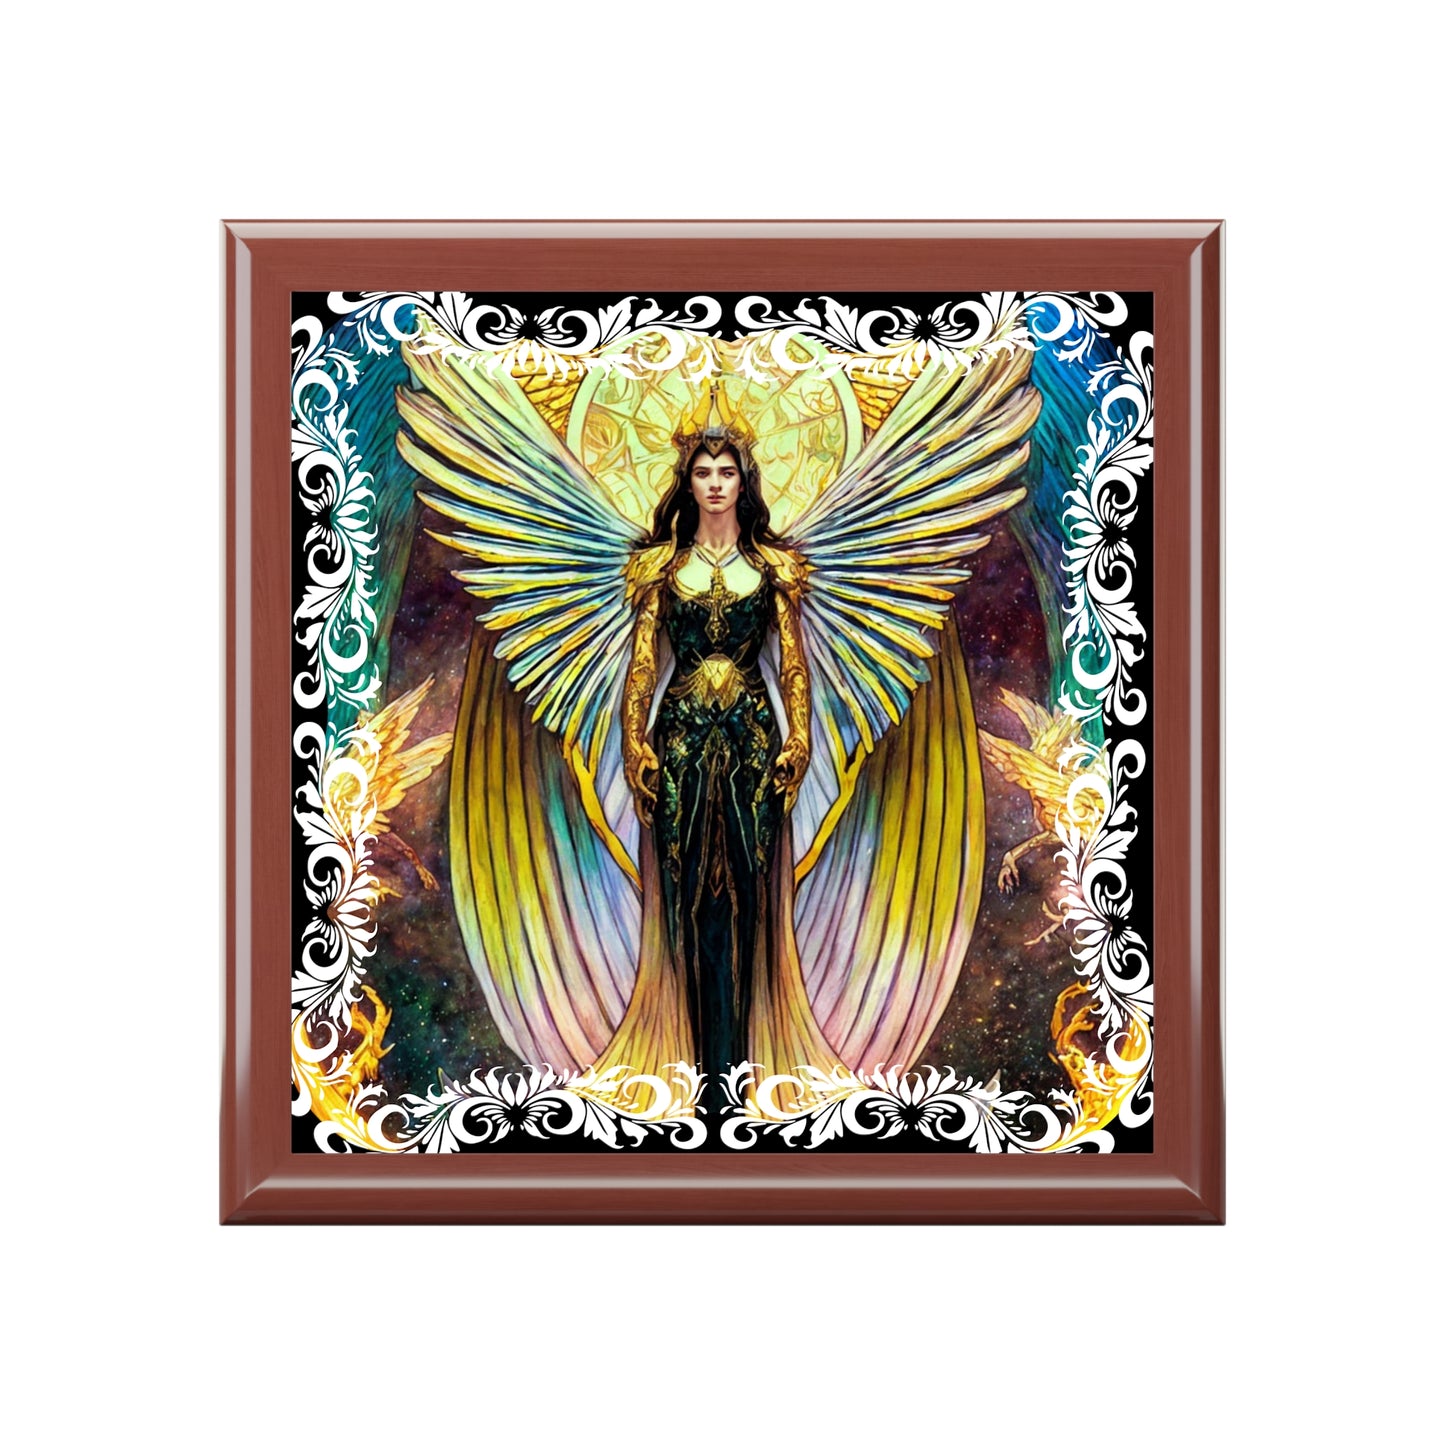 Archangel Uriel Angelic Jewelry Box - Angelic Thrones: Your Gateway to the Angelic Realms